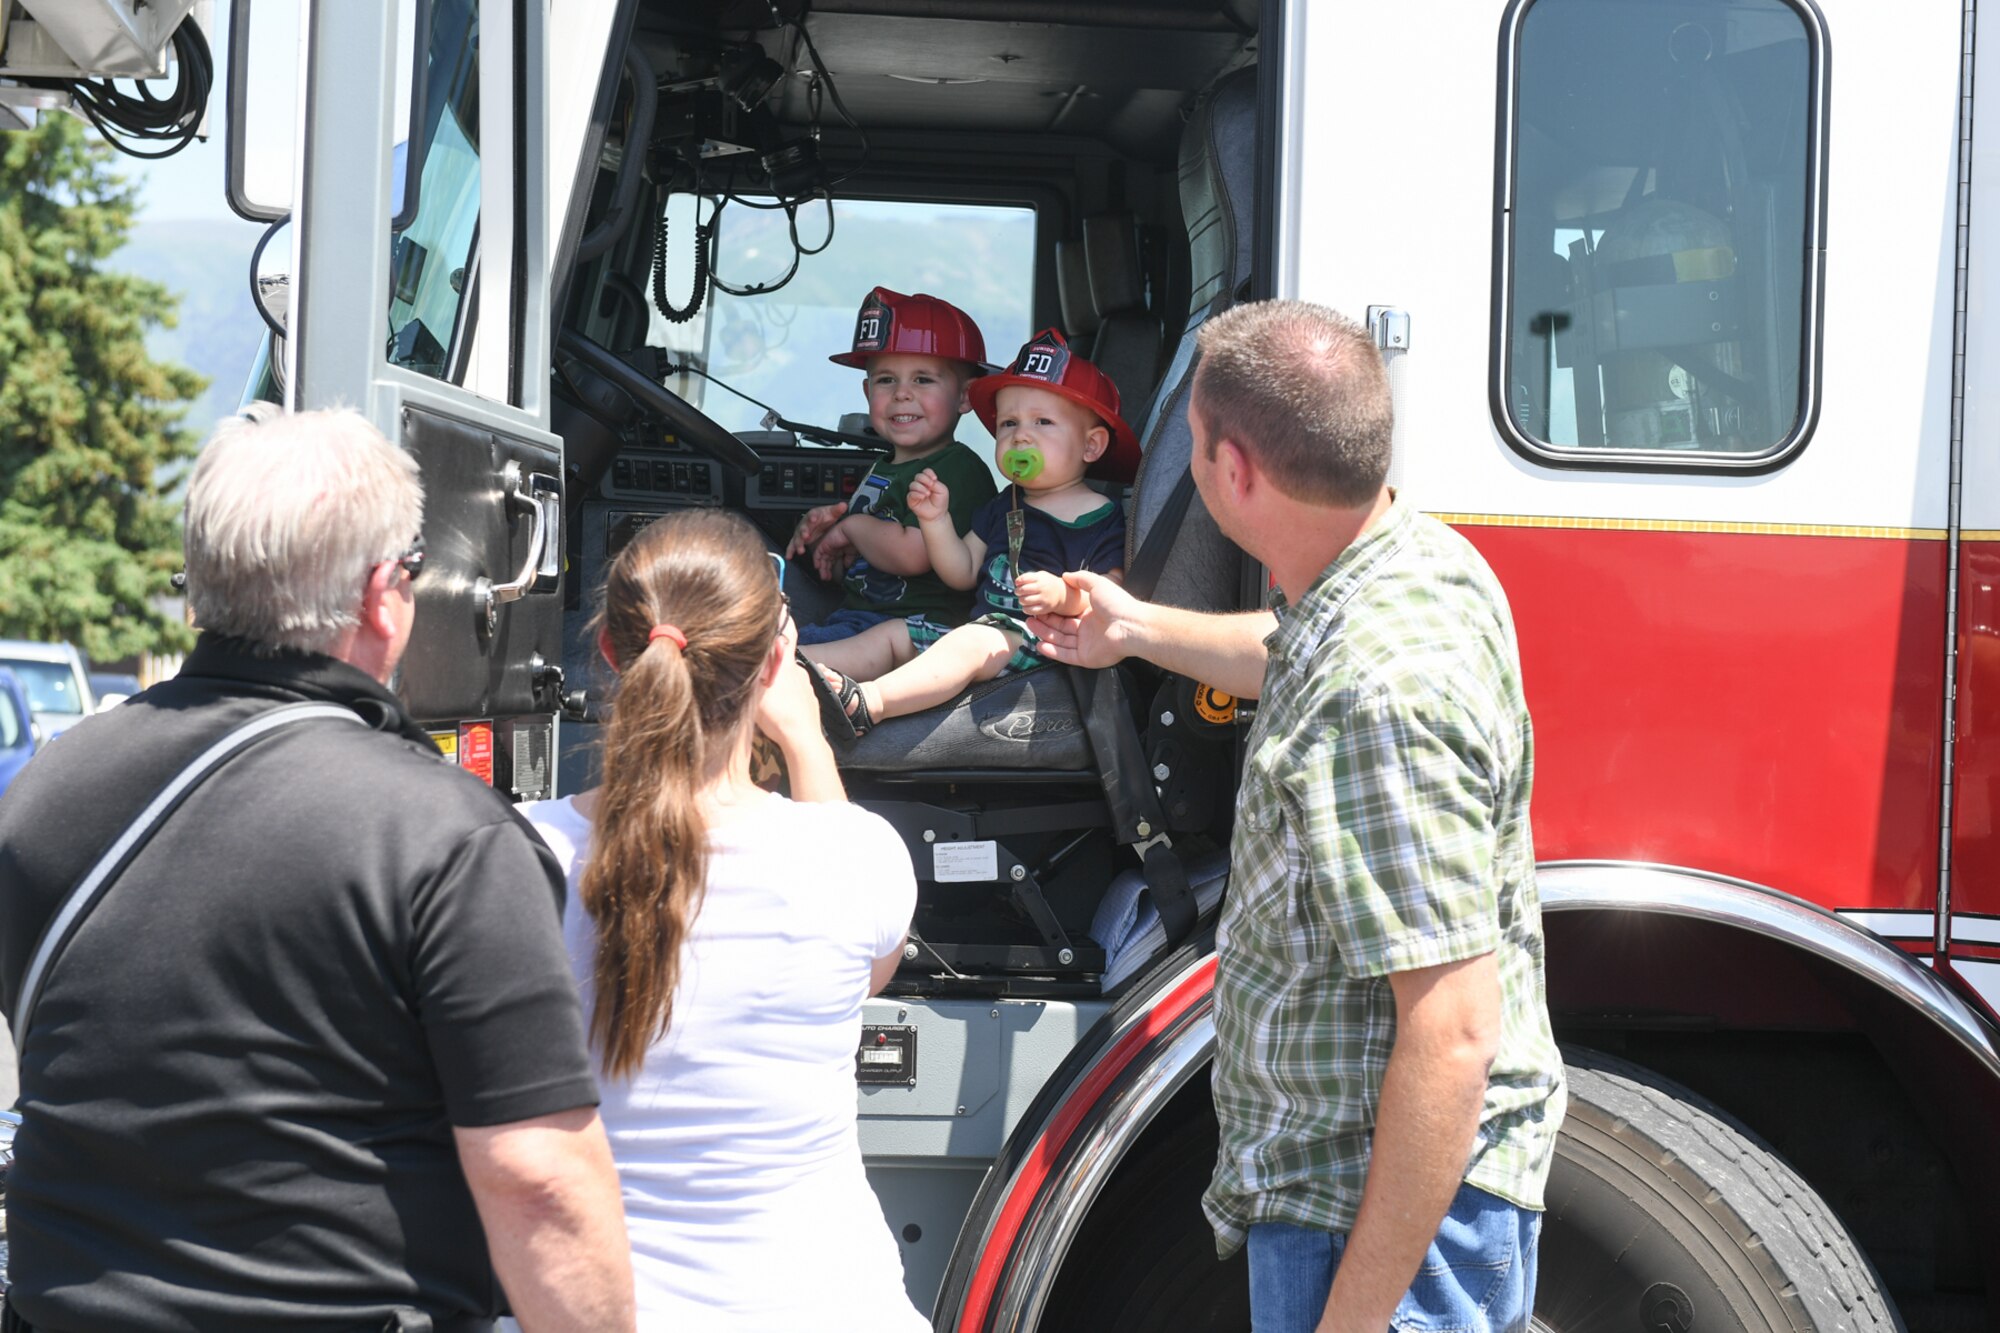 Luke and Wyatt Jeppson, with parents Kyle and Cheryl, admire a fire engine during Wheels of Wonder June 8, 2018, at Hill Air Force Base, Utah. Wheels of Wonder provides base families a fun, hands-on experience exploring various types of vehicles. (U.S. Air Force photo by Cynthia Griggs)